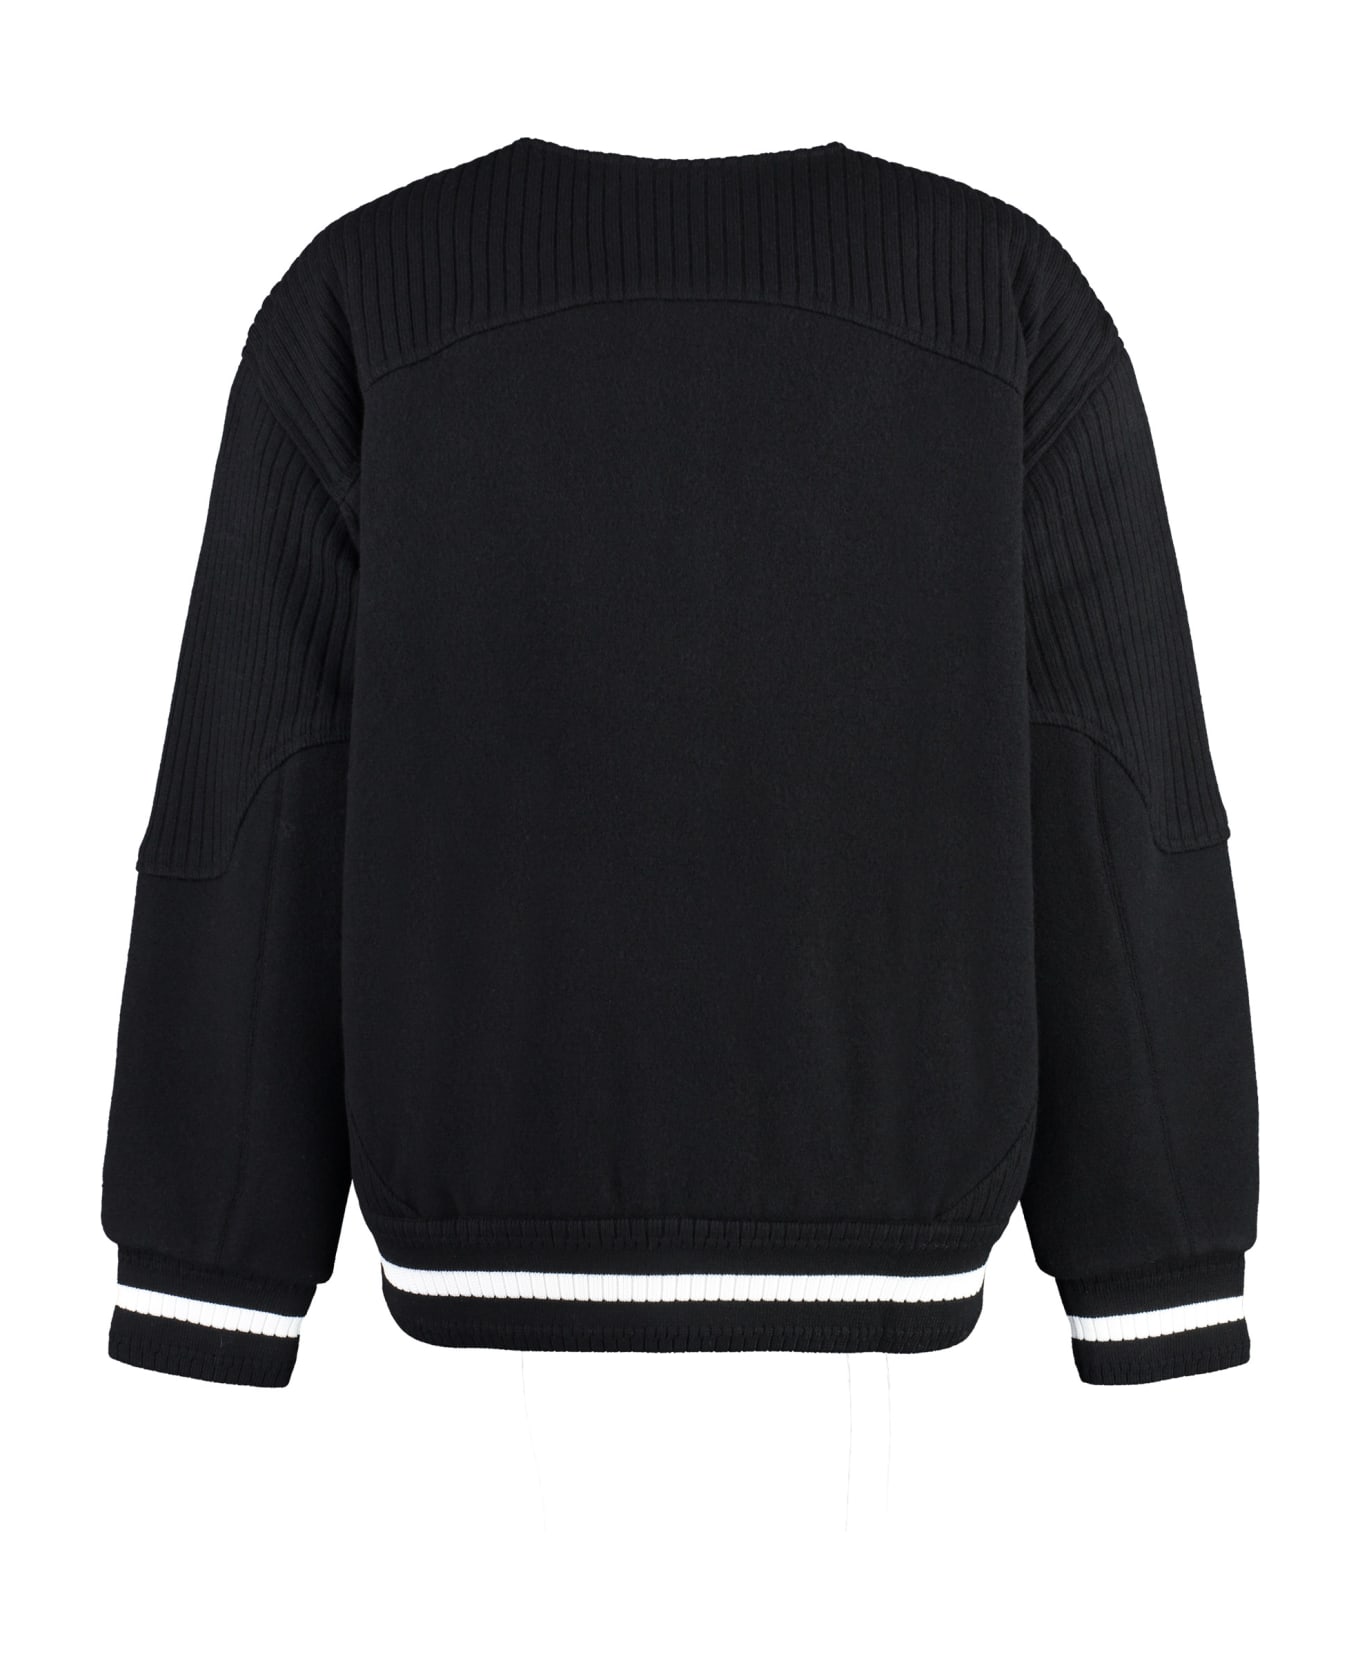 Givenchy Wool Bomber Jacket With Patch - black